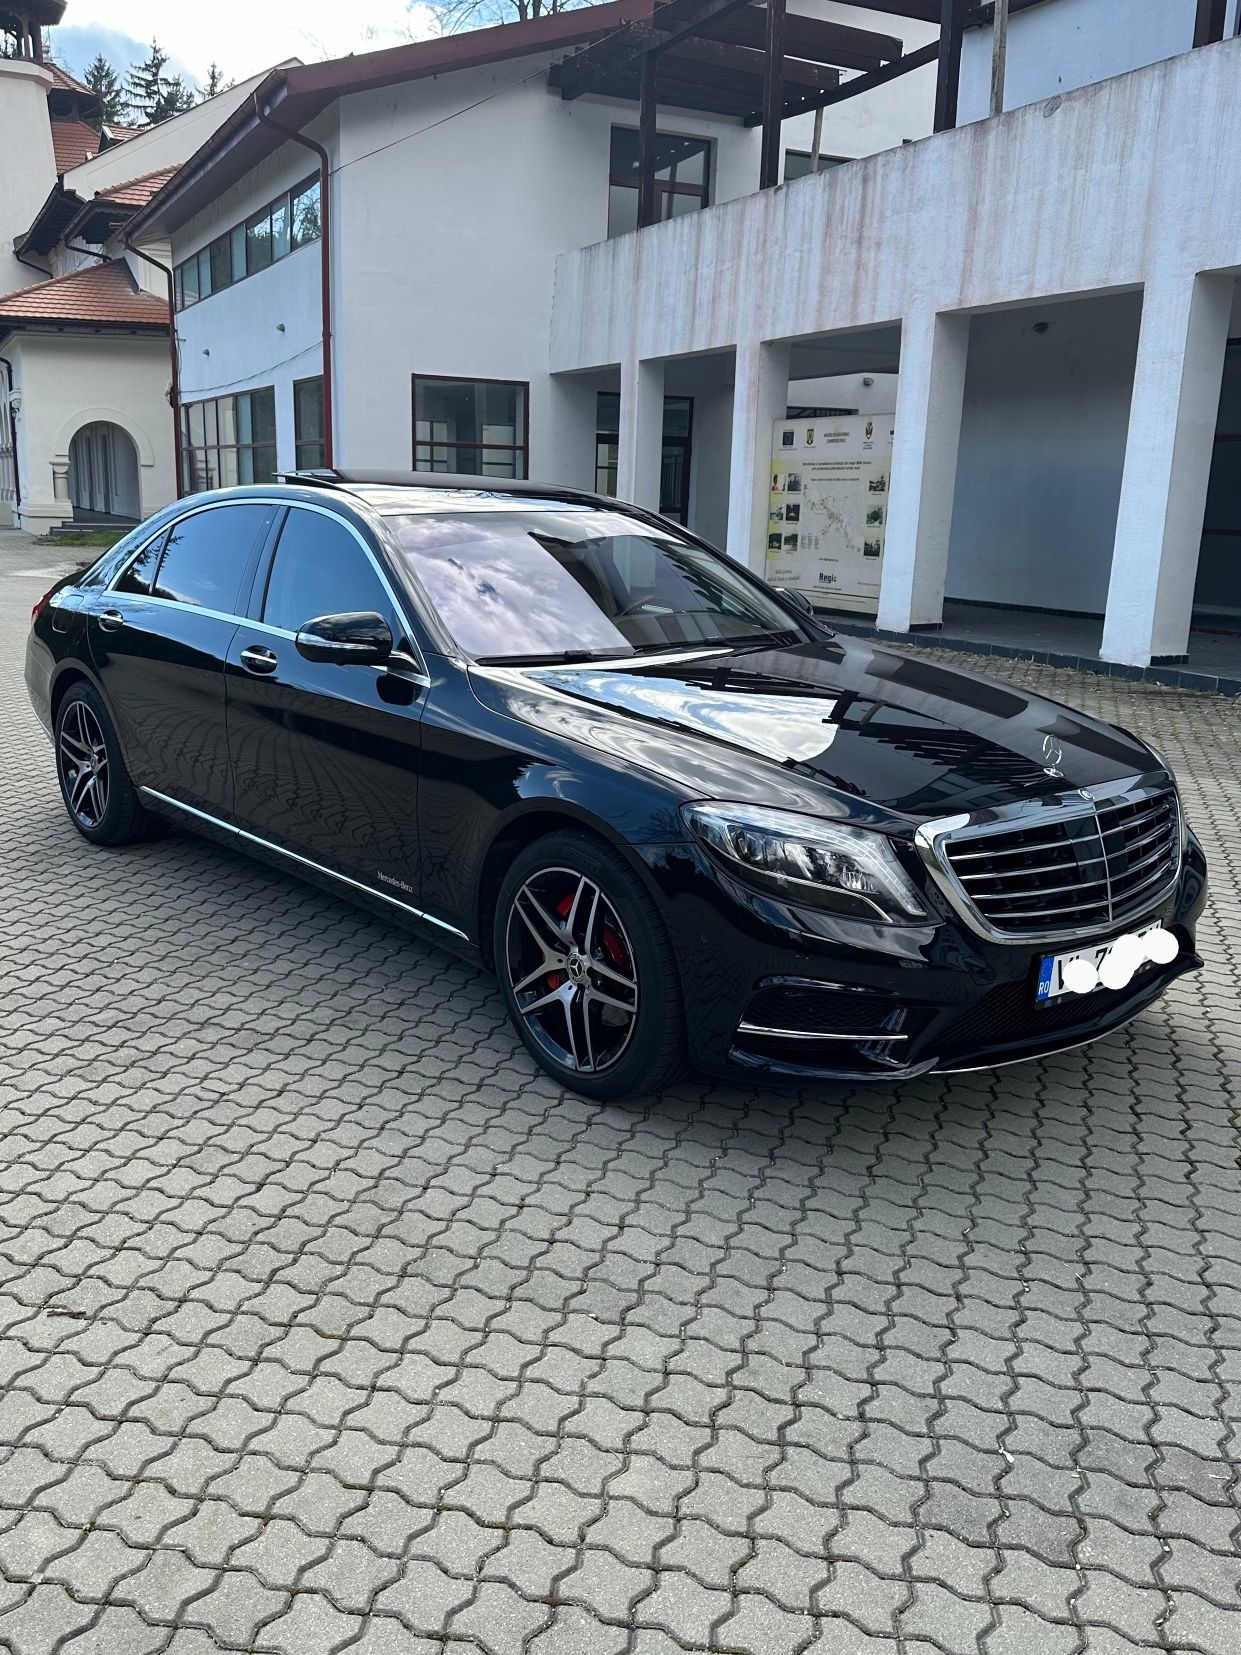 Mercedes S350,4matic,airmatic,2016,5butoane,AMG.Accept unele variante.